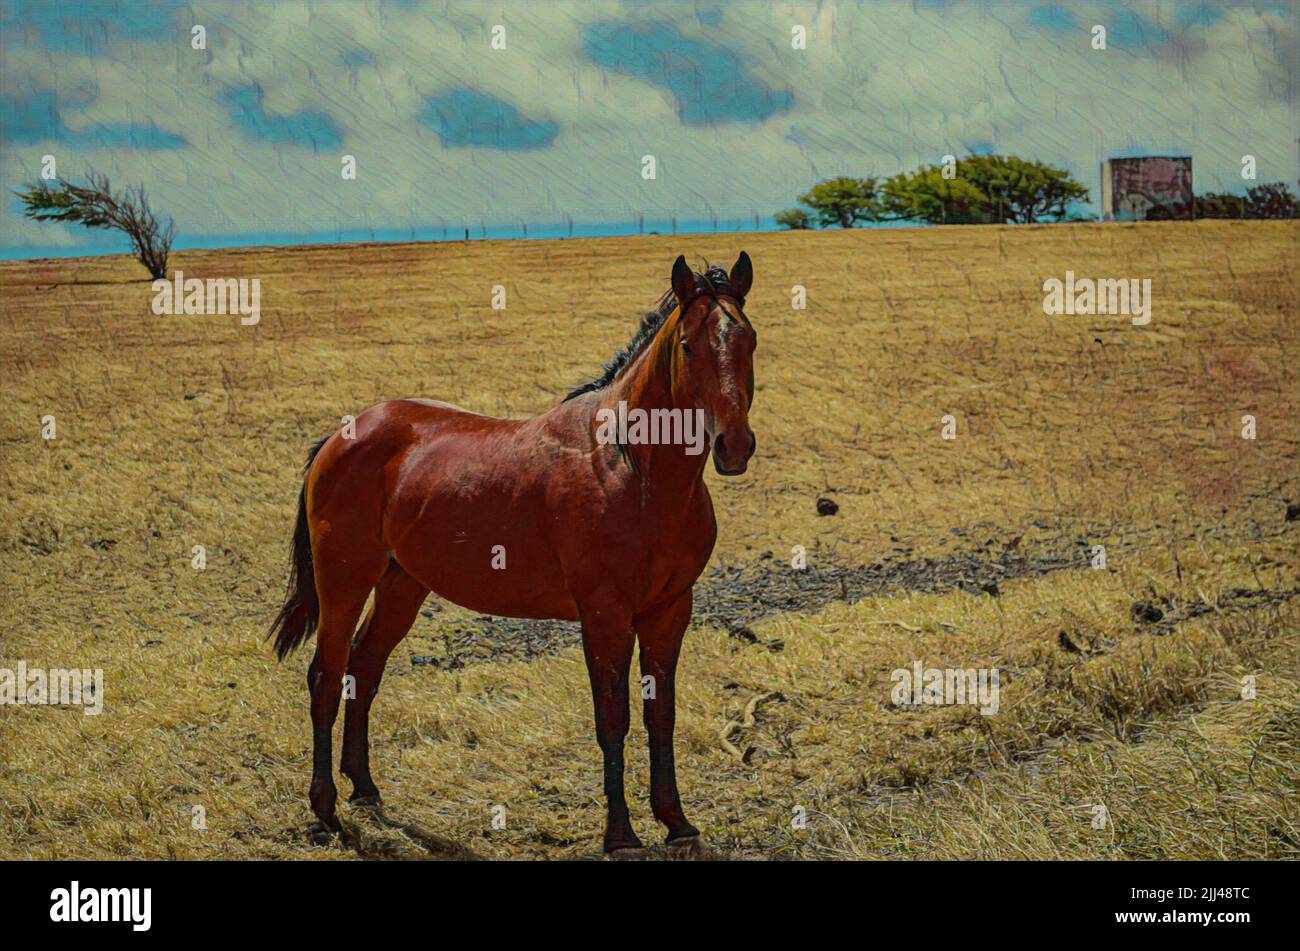 Horse in a dry grassy field on the southernmost part of Mauna Loa, the Big Island of Hawaii.  Edited to create an Illustration from a photo. Stock Photo